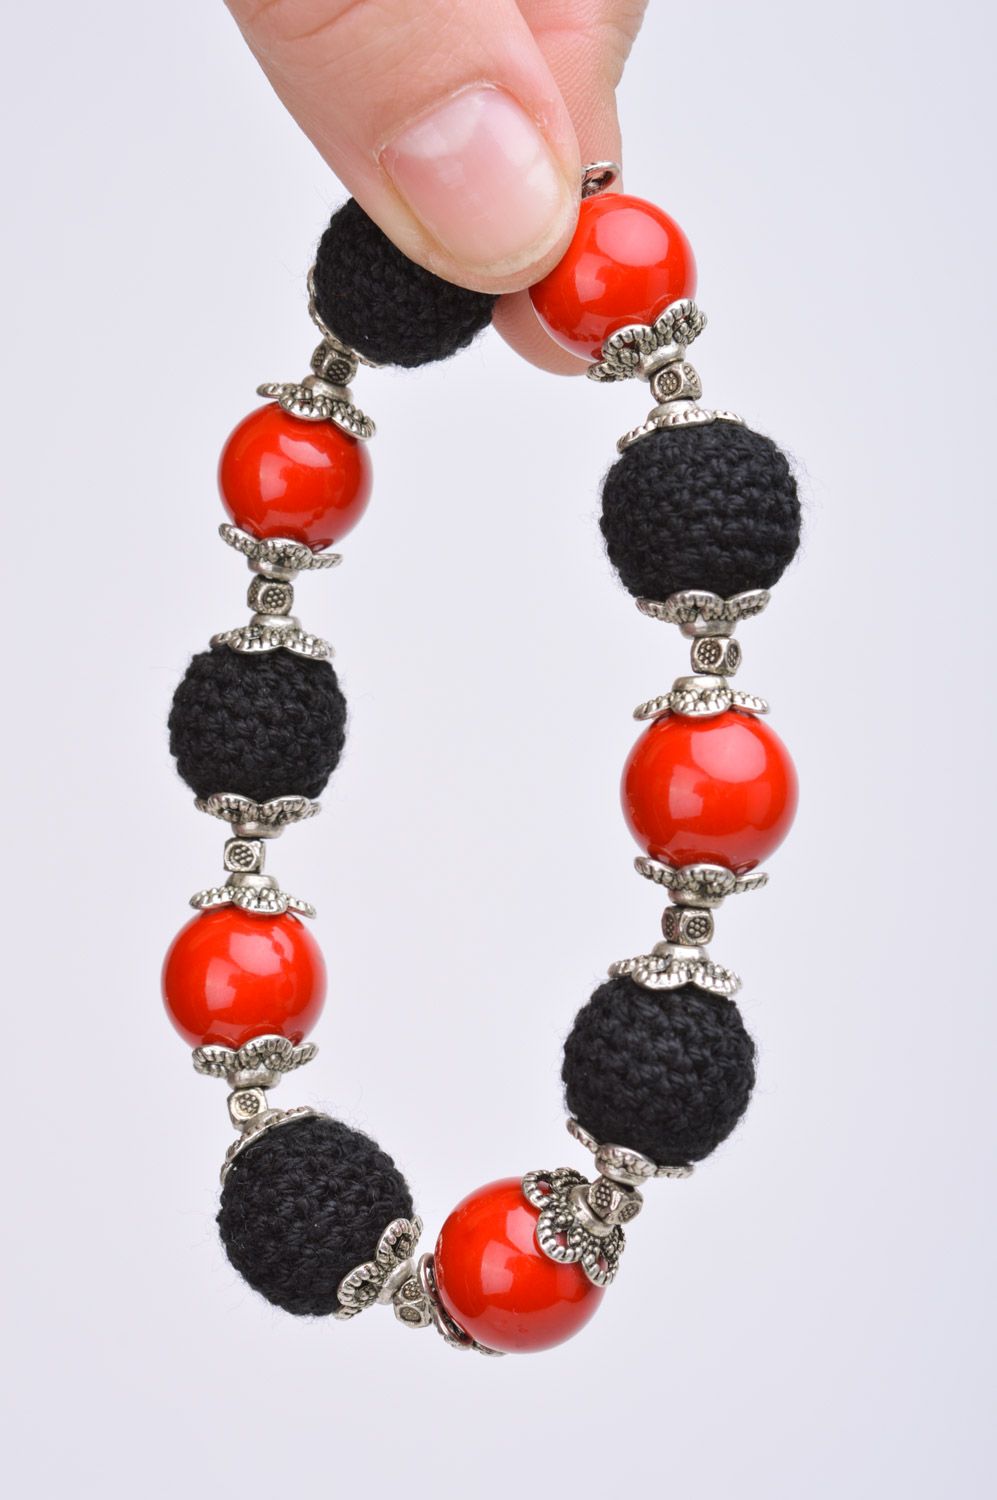 Handmade red and black wrist bracelet with beads crocheted over with threads Passion photo 3